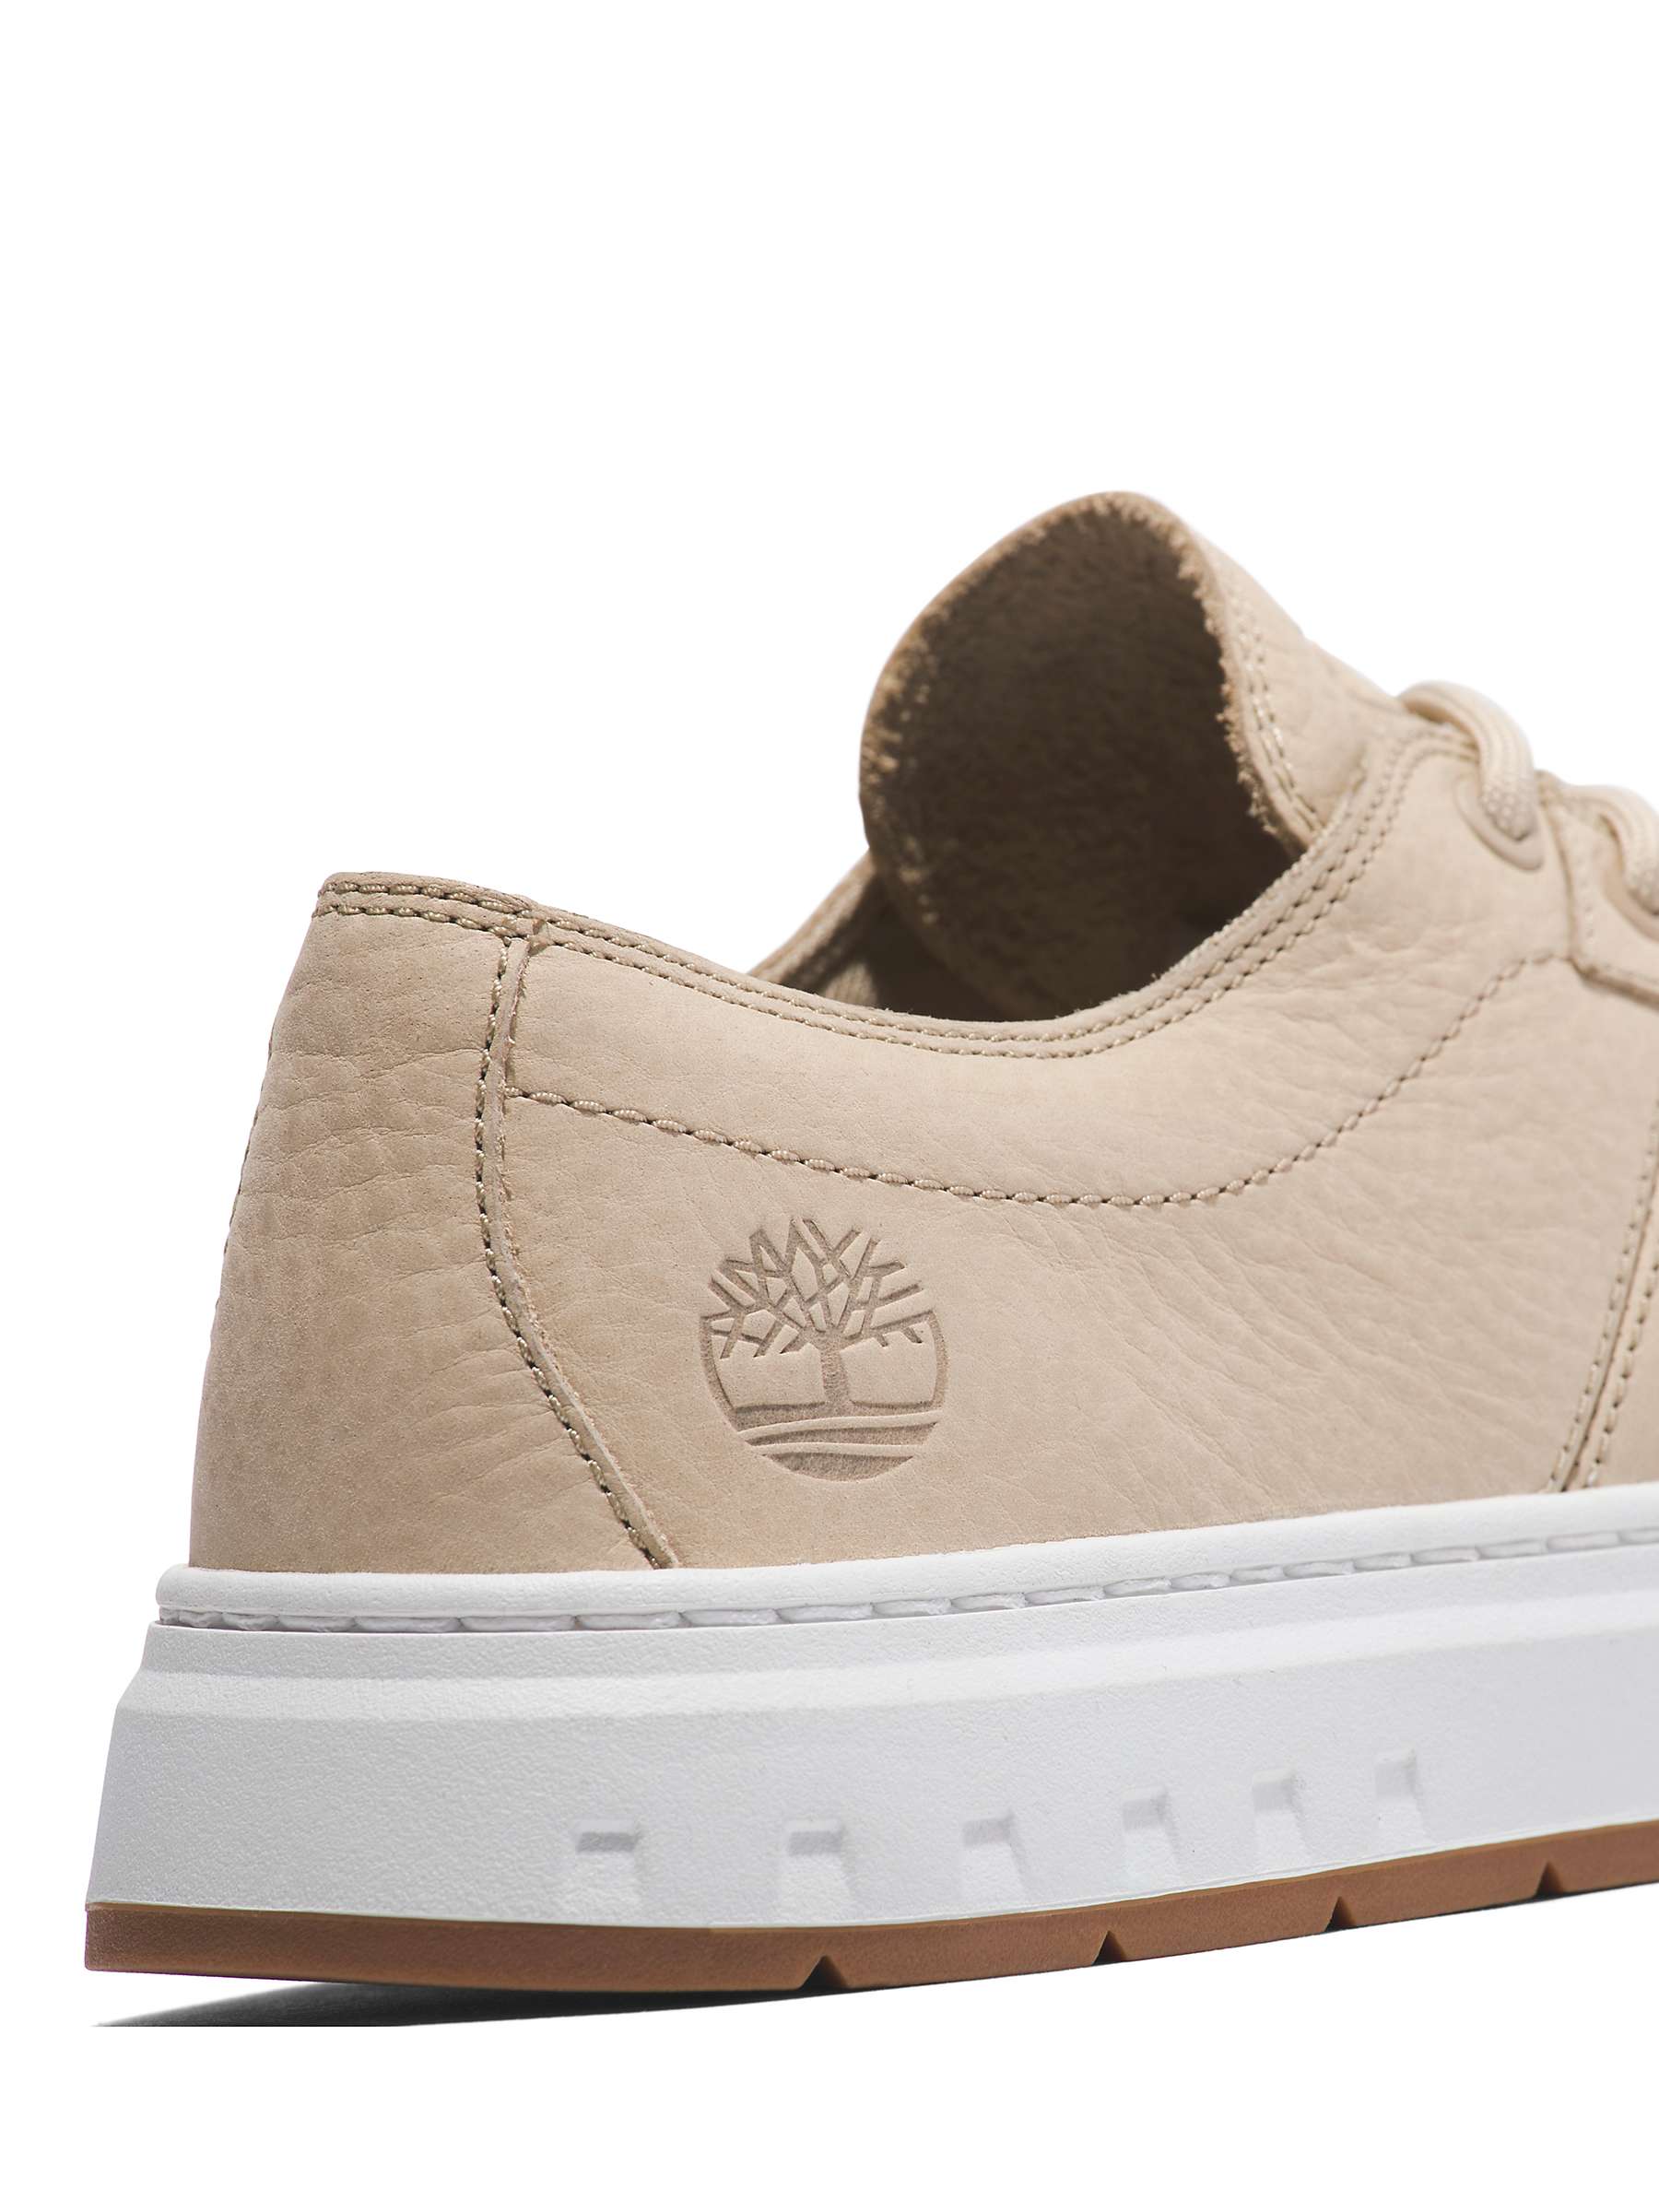 Buy Timberland Maple Grove Boat Shoes, Light Beige Online at johnlewis.com